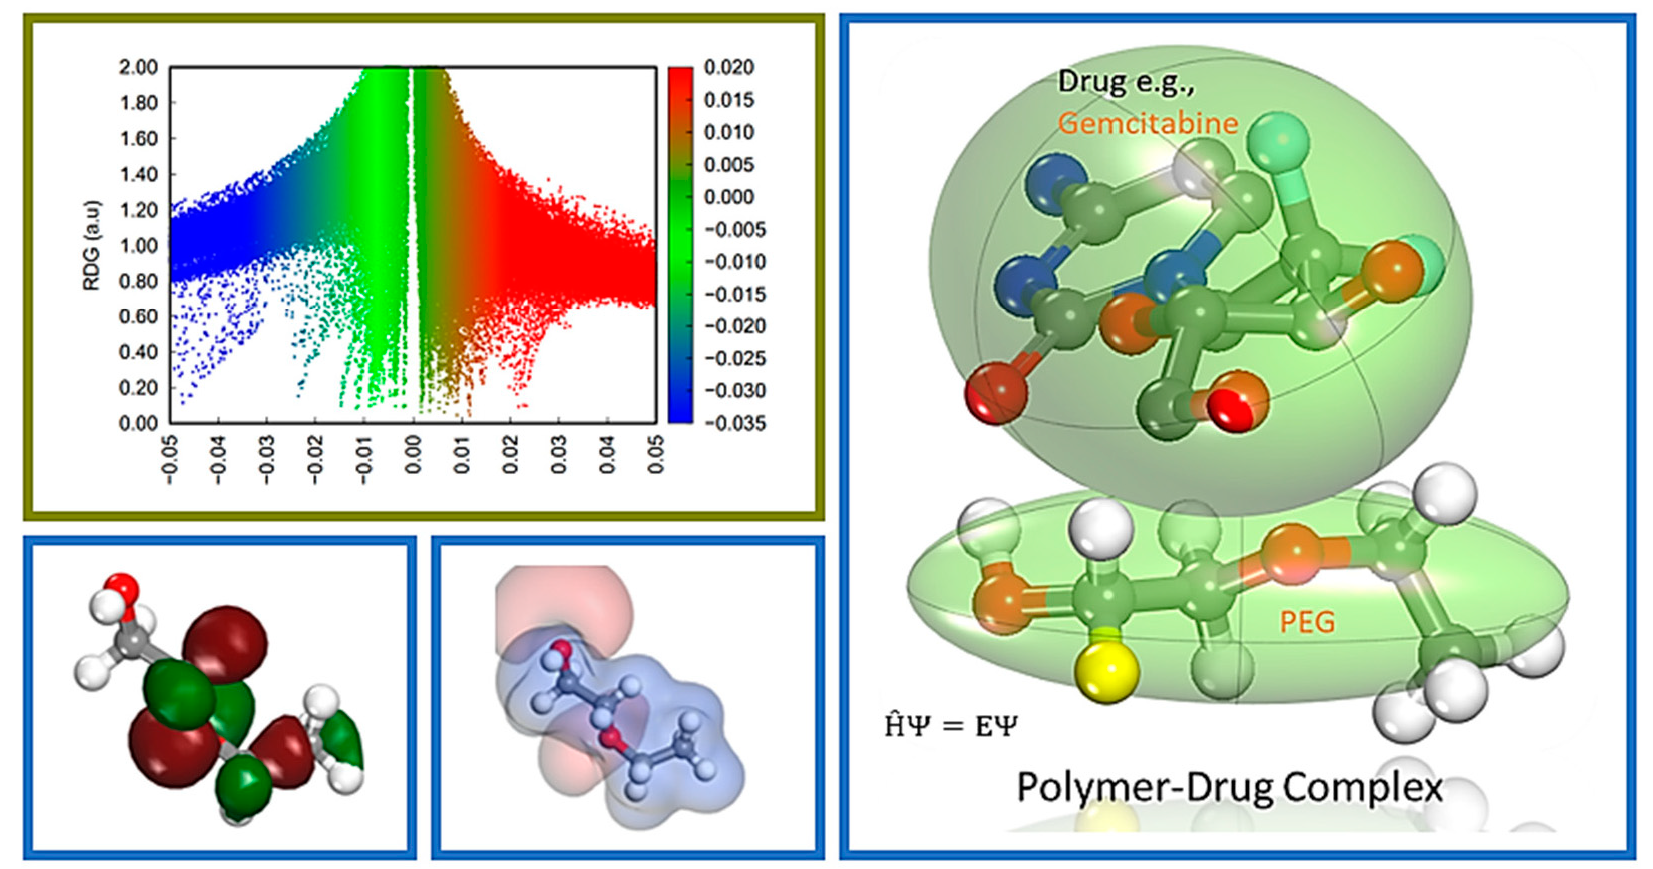 Pharmaceutics | Free Full-Text | Application of DFT Calculations in Designing Polymer-Based Drug Delivery Systems: An Overview